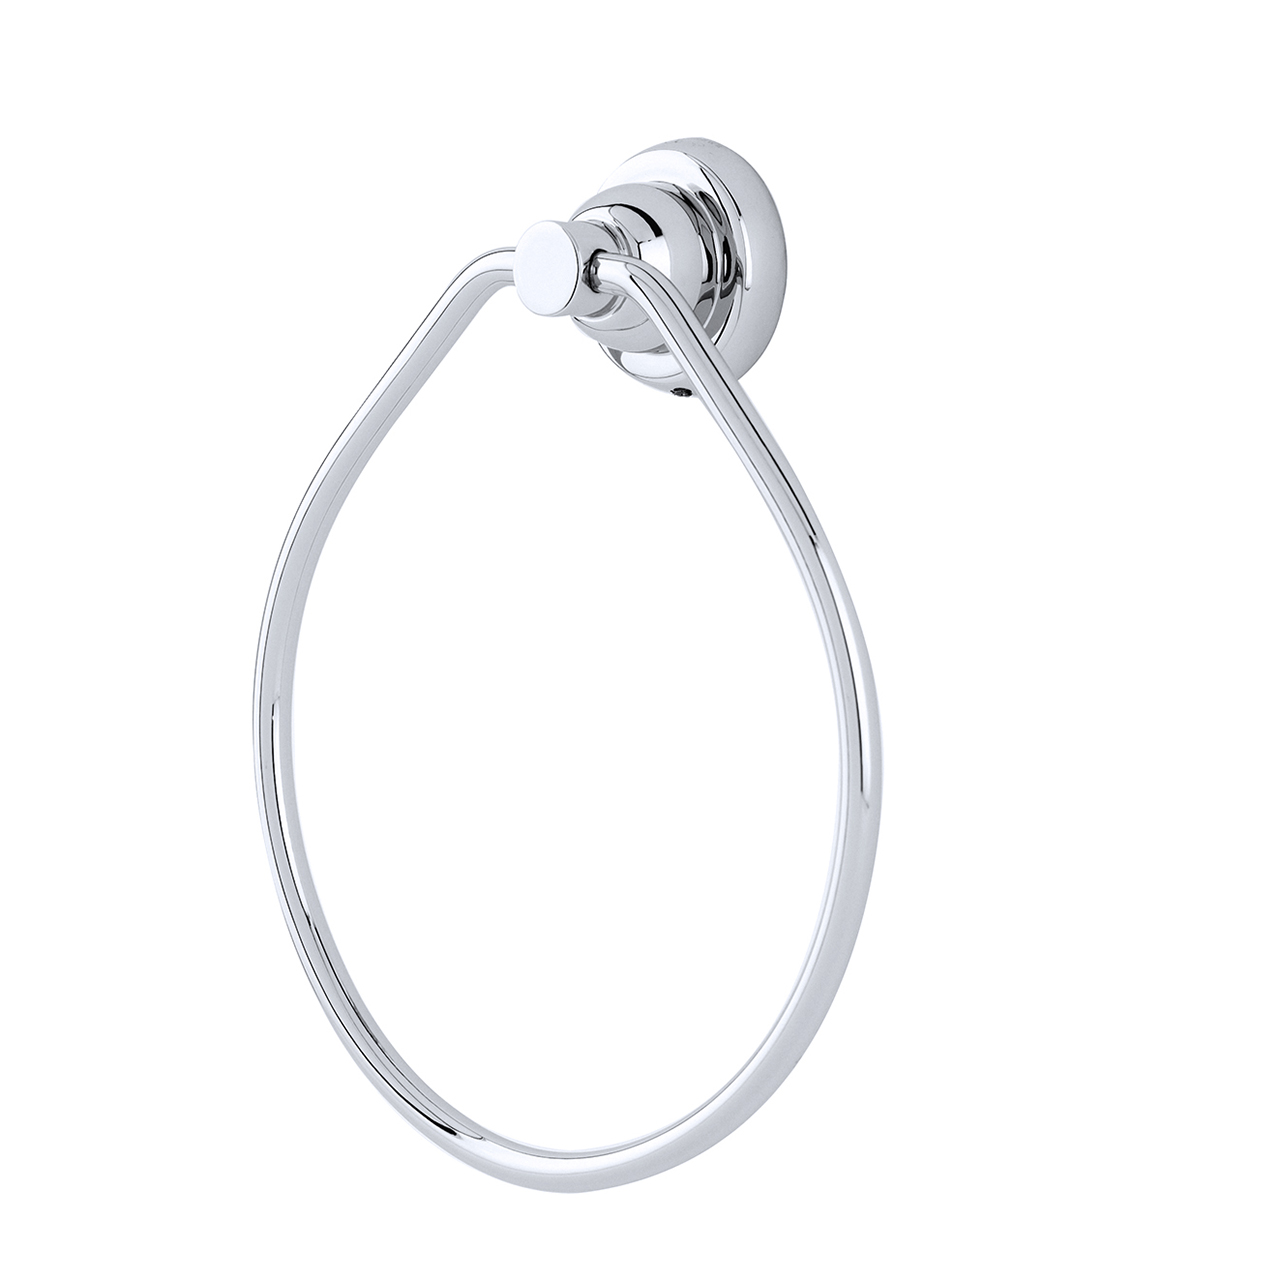 Perrin & Rowe - Contemporary towel ring | The English Tapware Company